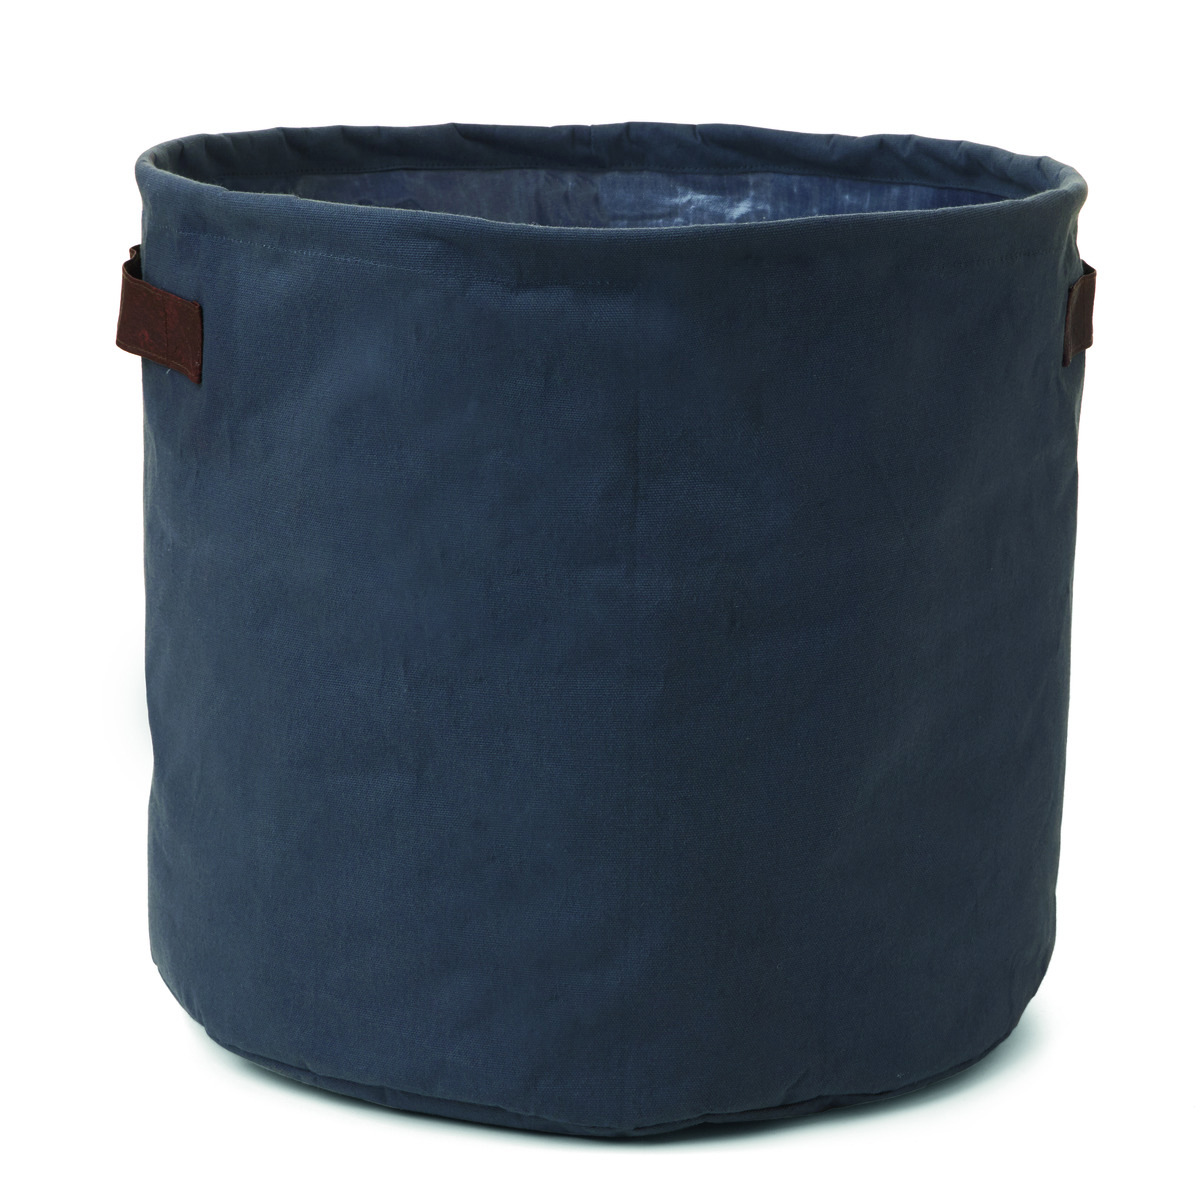 Collapsible Hamper - Small, Blue